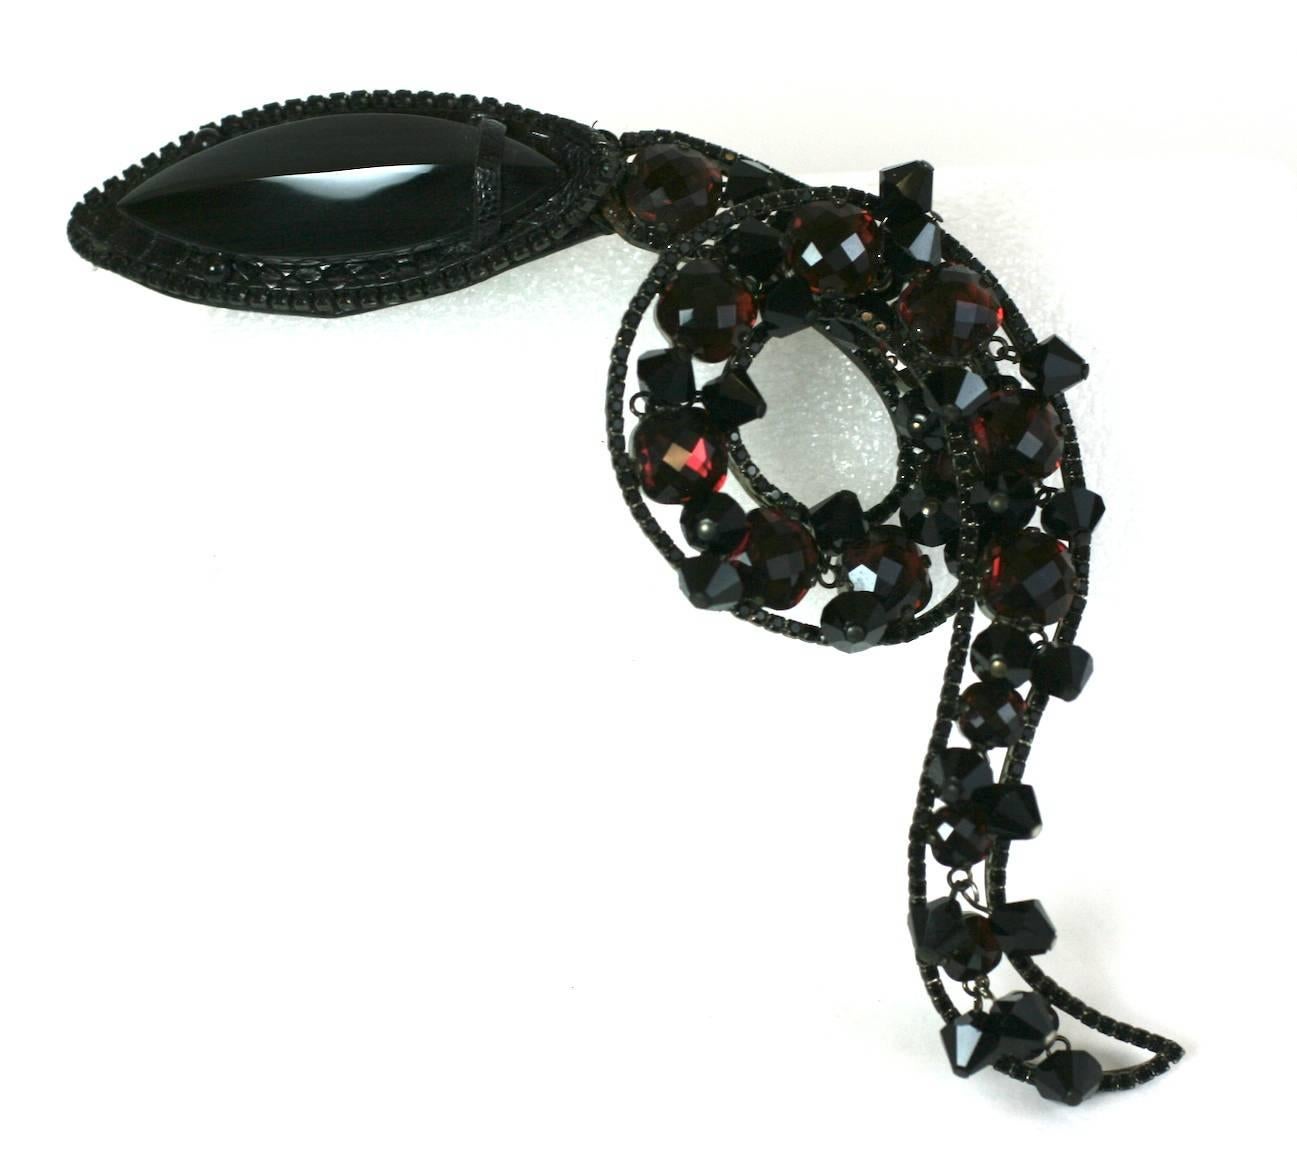 Amazing Haute Couture Valentino Snake Brooch from the 1980's. Completely hand made, with an ornate curled setting of miniature jet pave, rose cut amythest crystals all set onto a base of shiny black snakeskin.
The head is a large marquise shaped